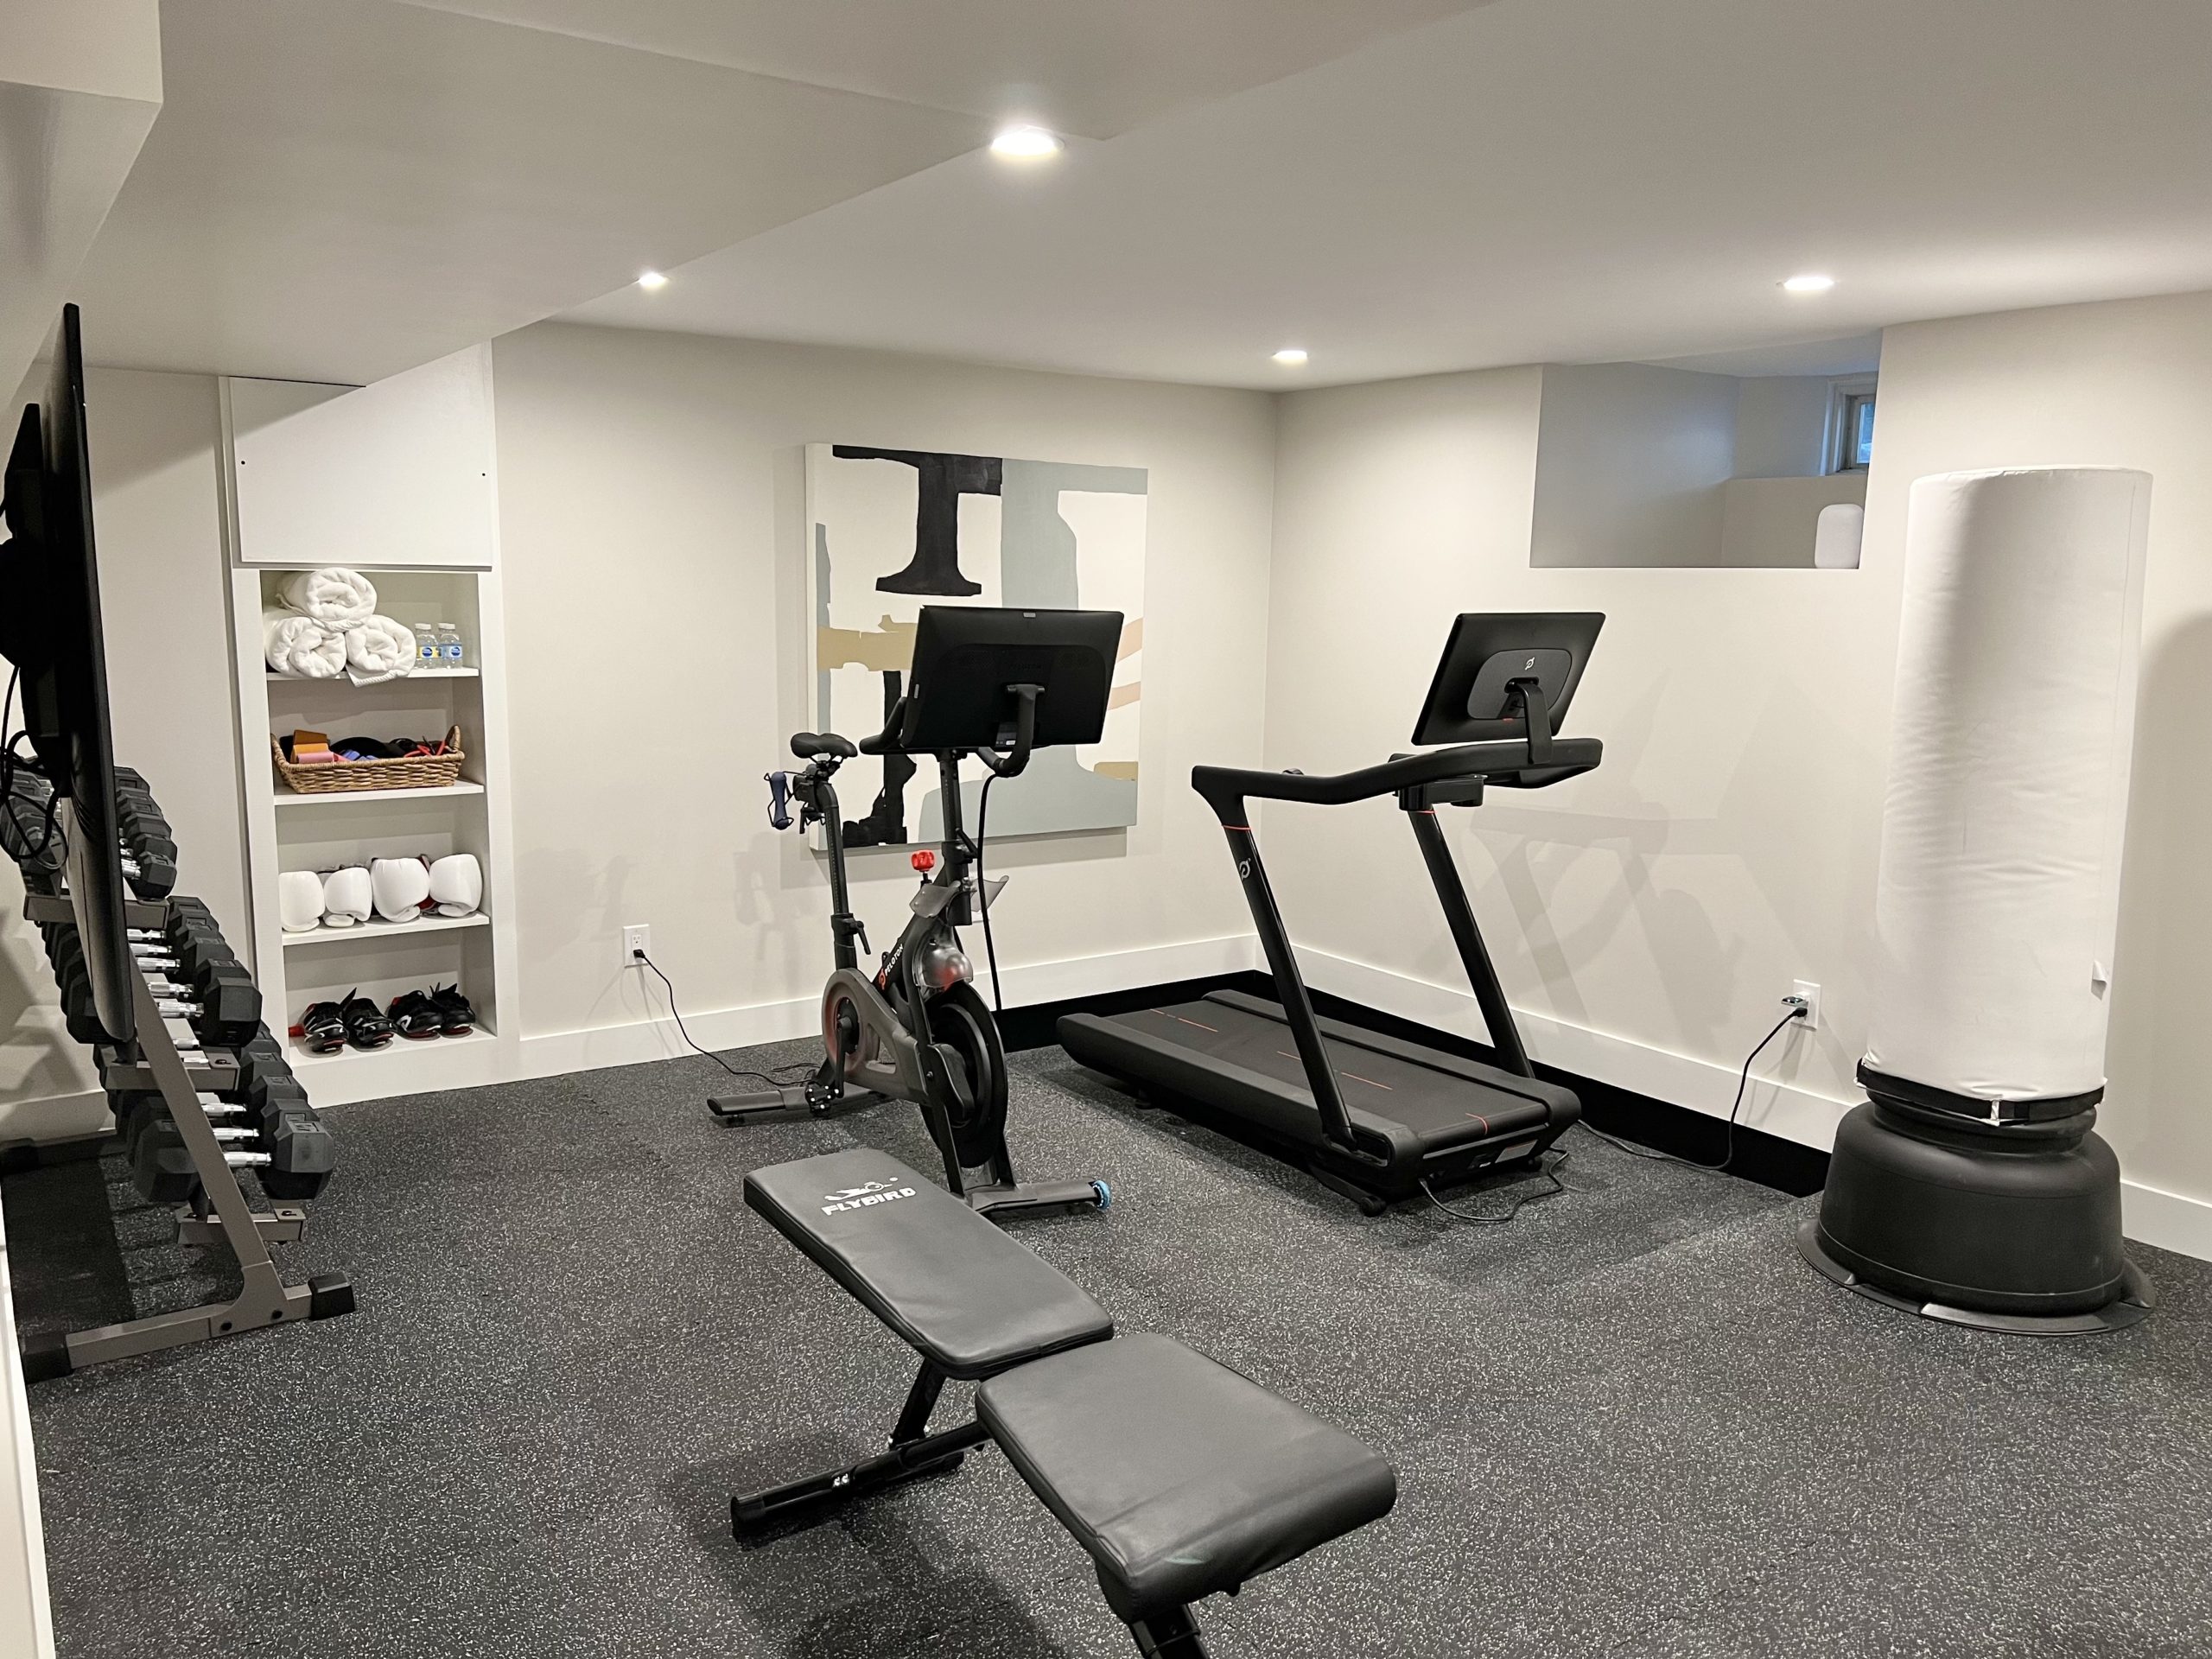 Elements of Style - My New House: Home Gym Reveal & Sources